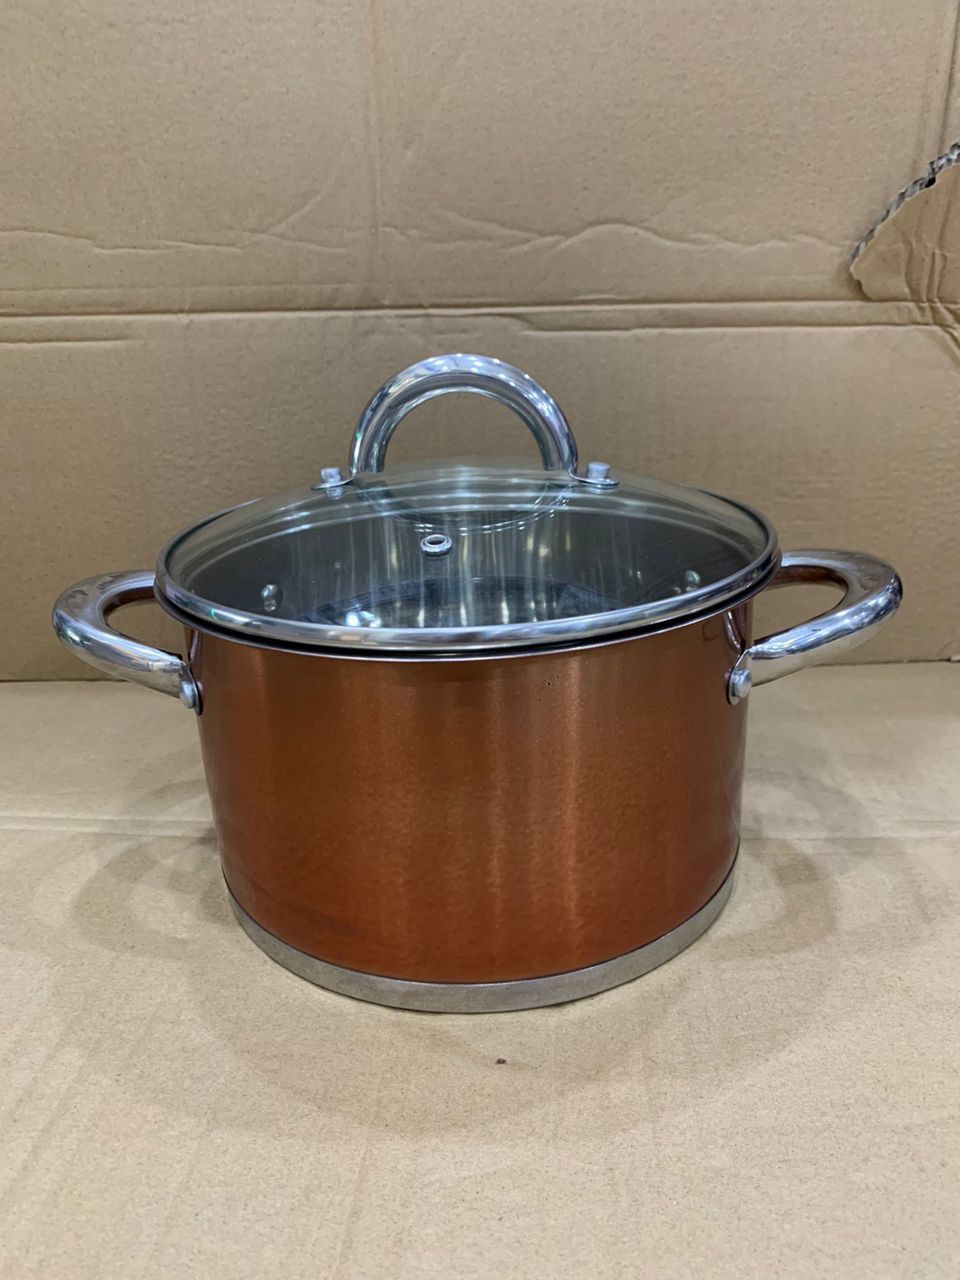 HERENTHAL Stainless Steel 20cm Casserole Pot with Glass lids